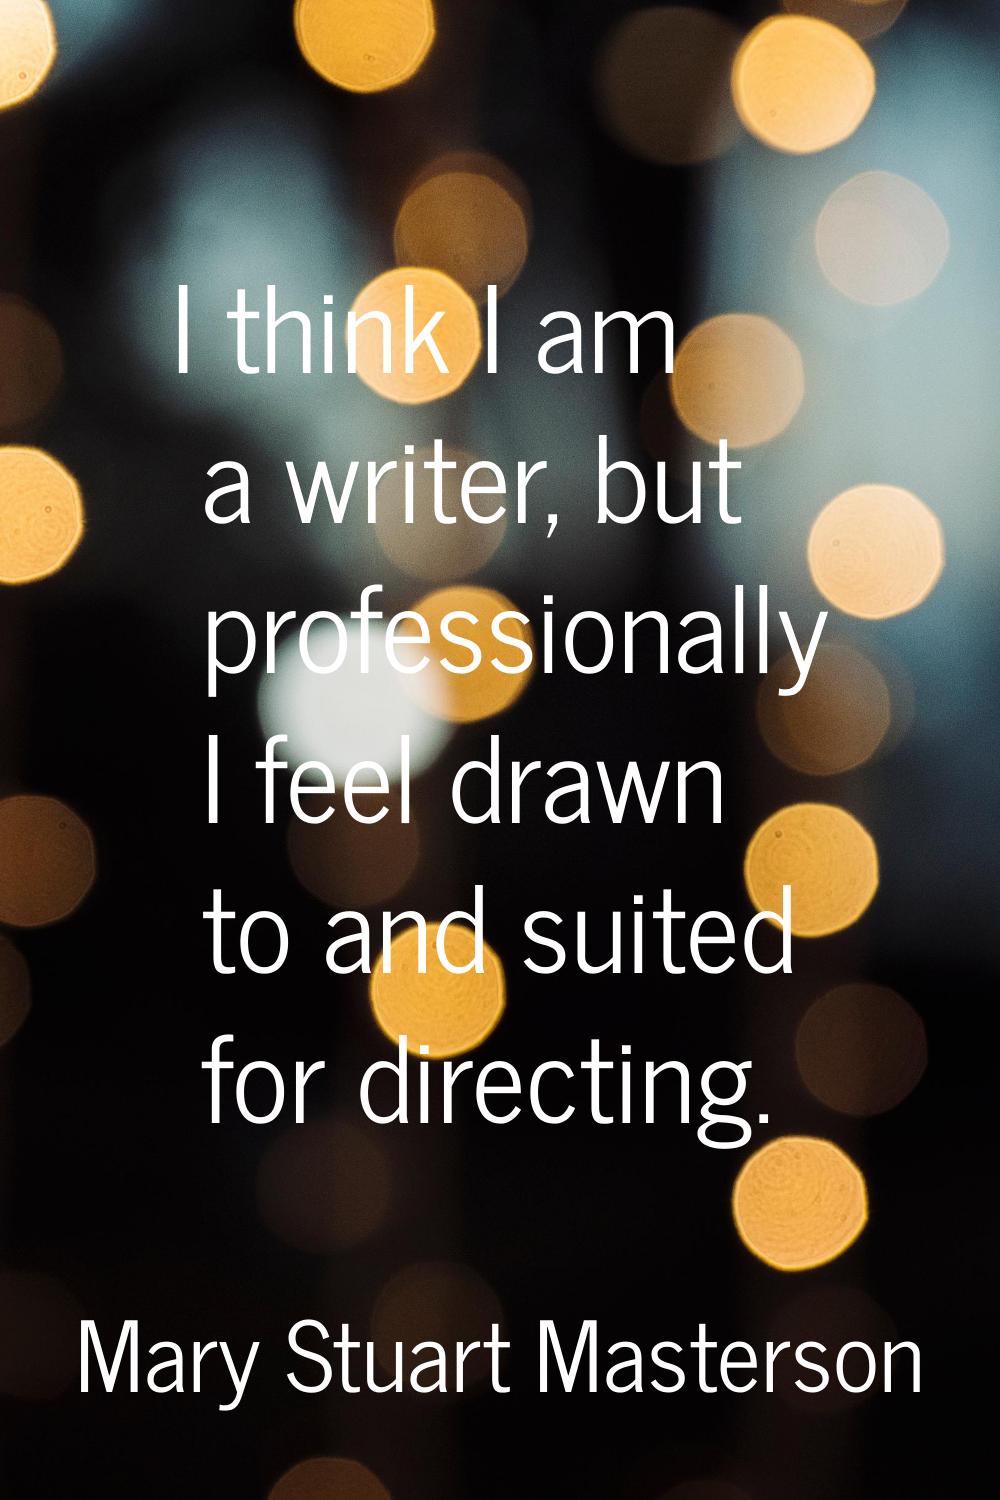 I think I am a writer, but professionally I feel drawn to and suited for directing.